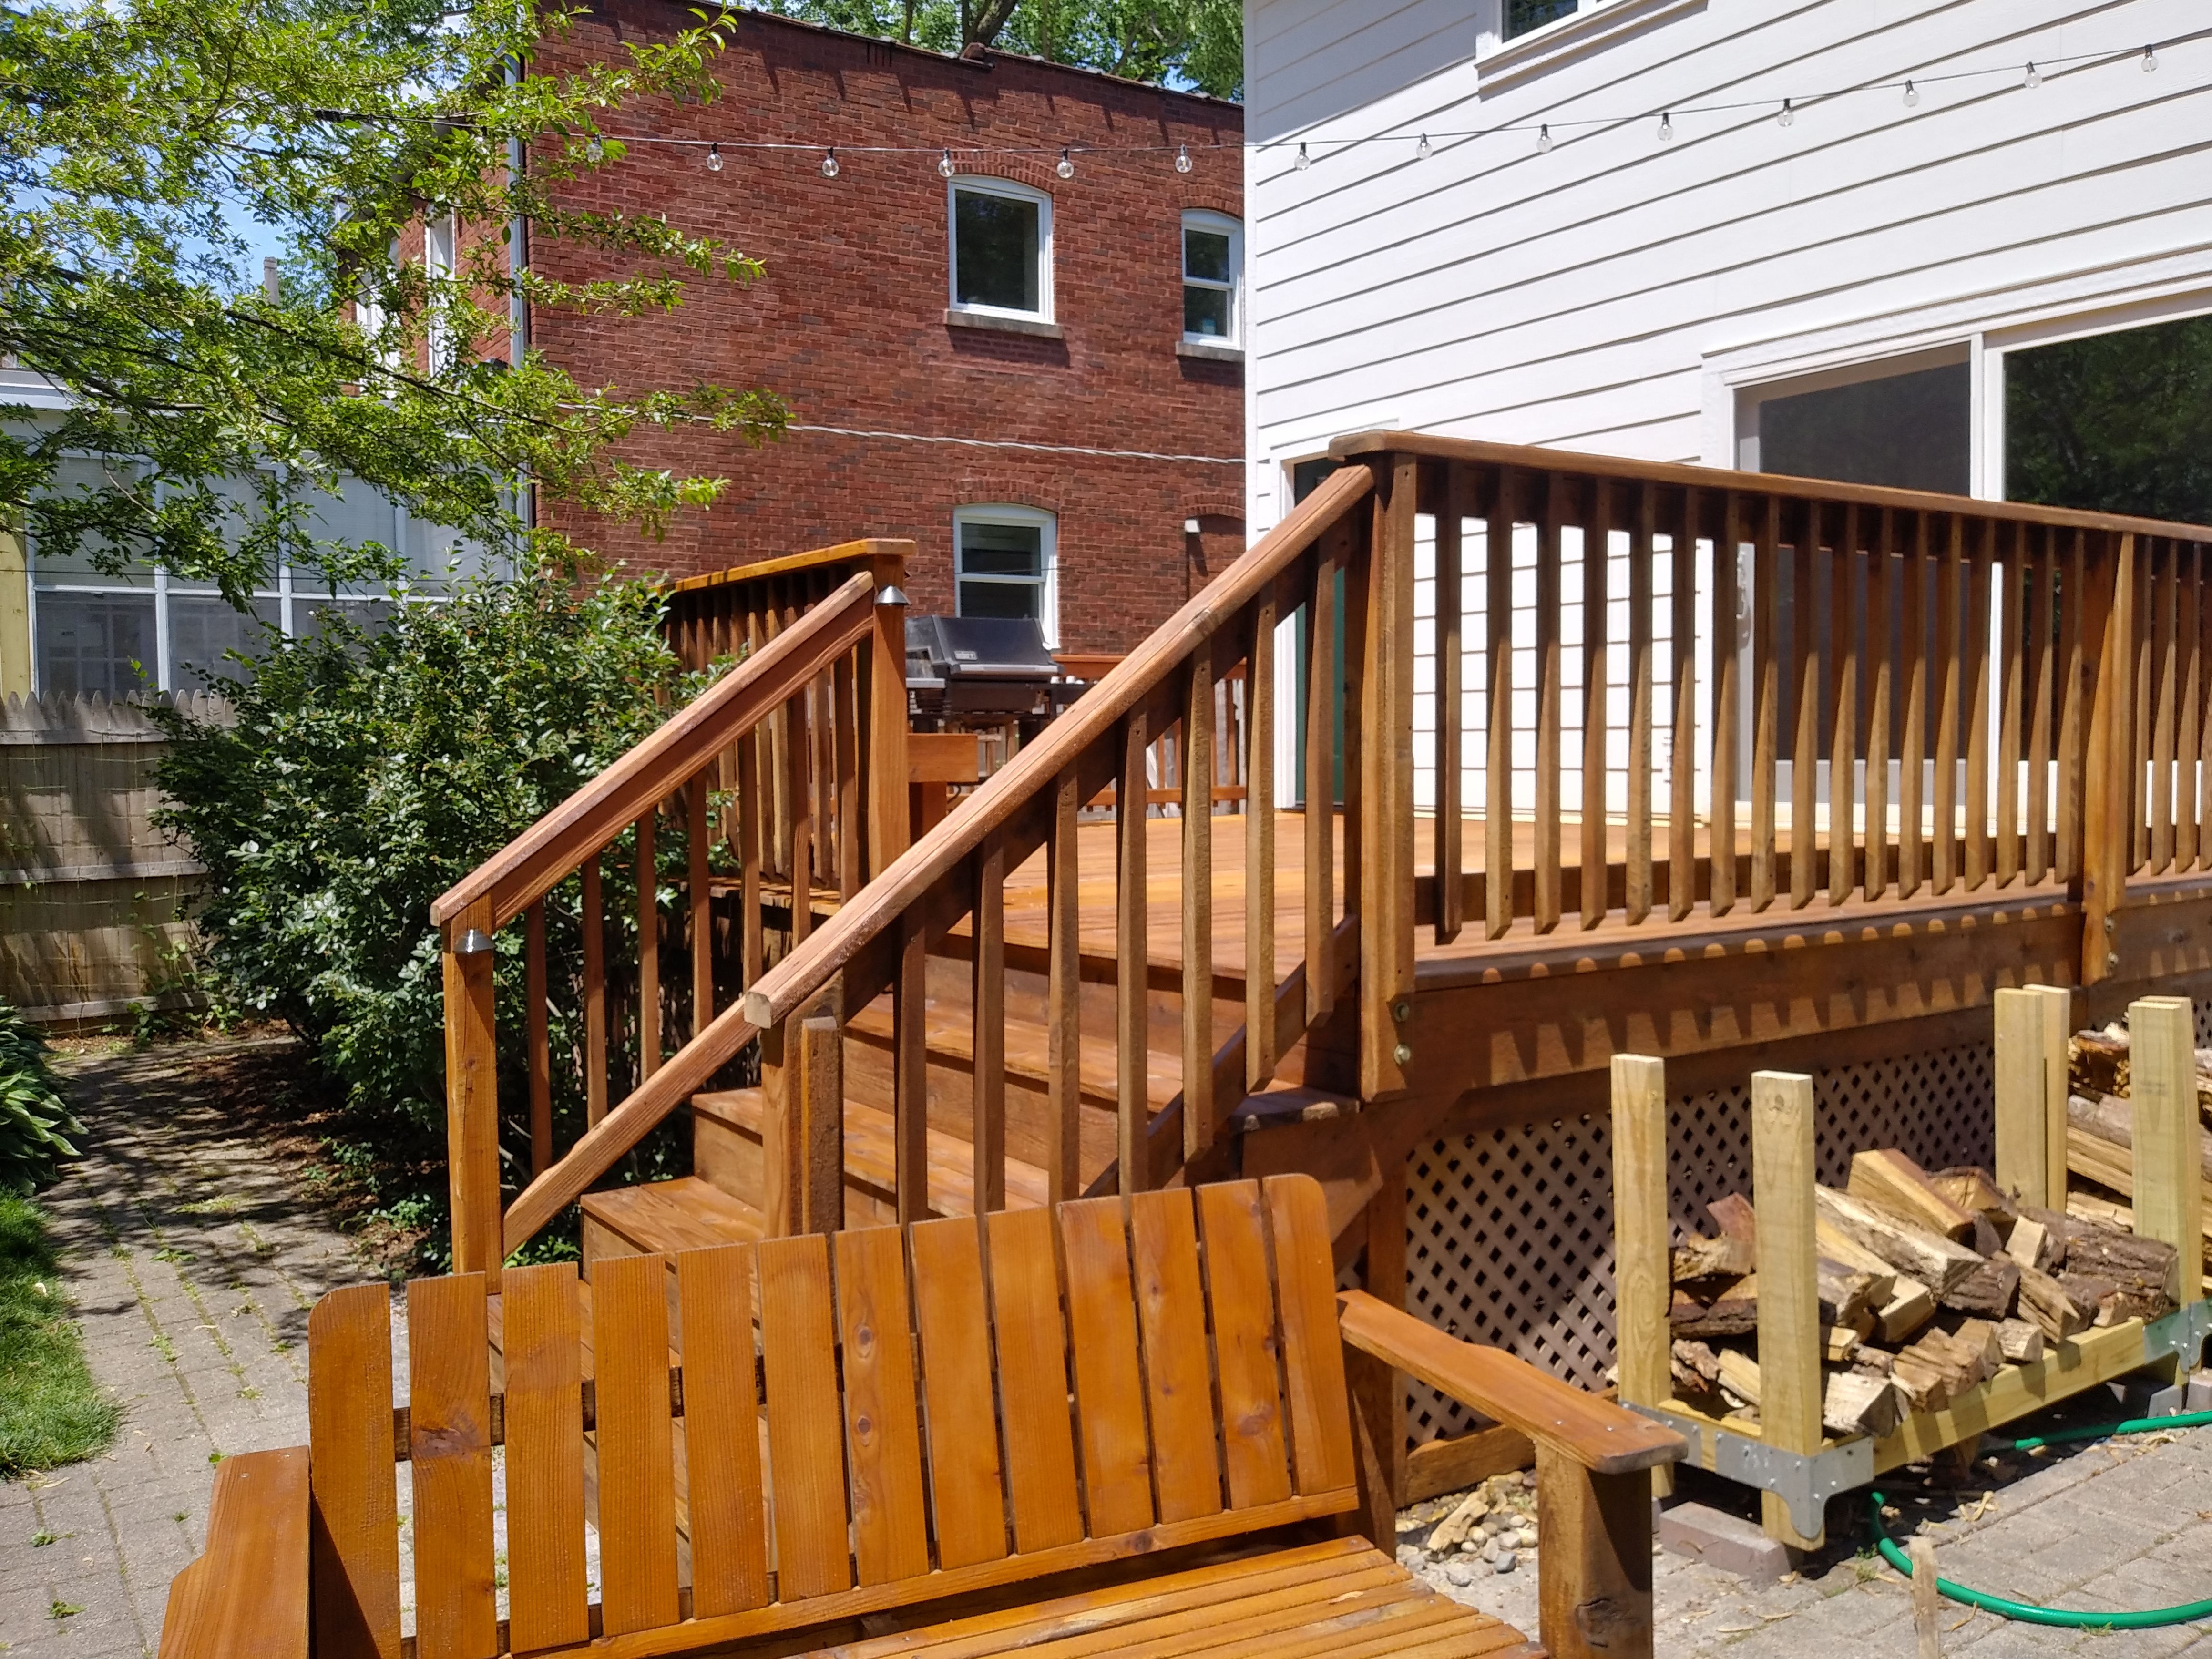 Get Ready for Fall by Protecting the Deck With the Deck Doc's Staining Services